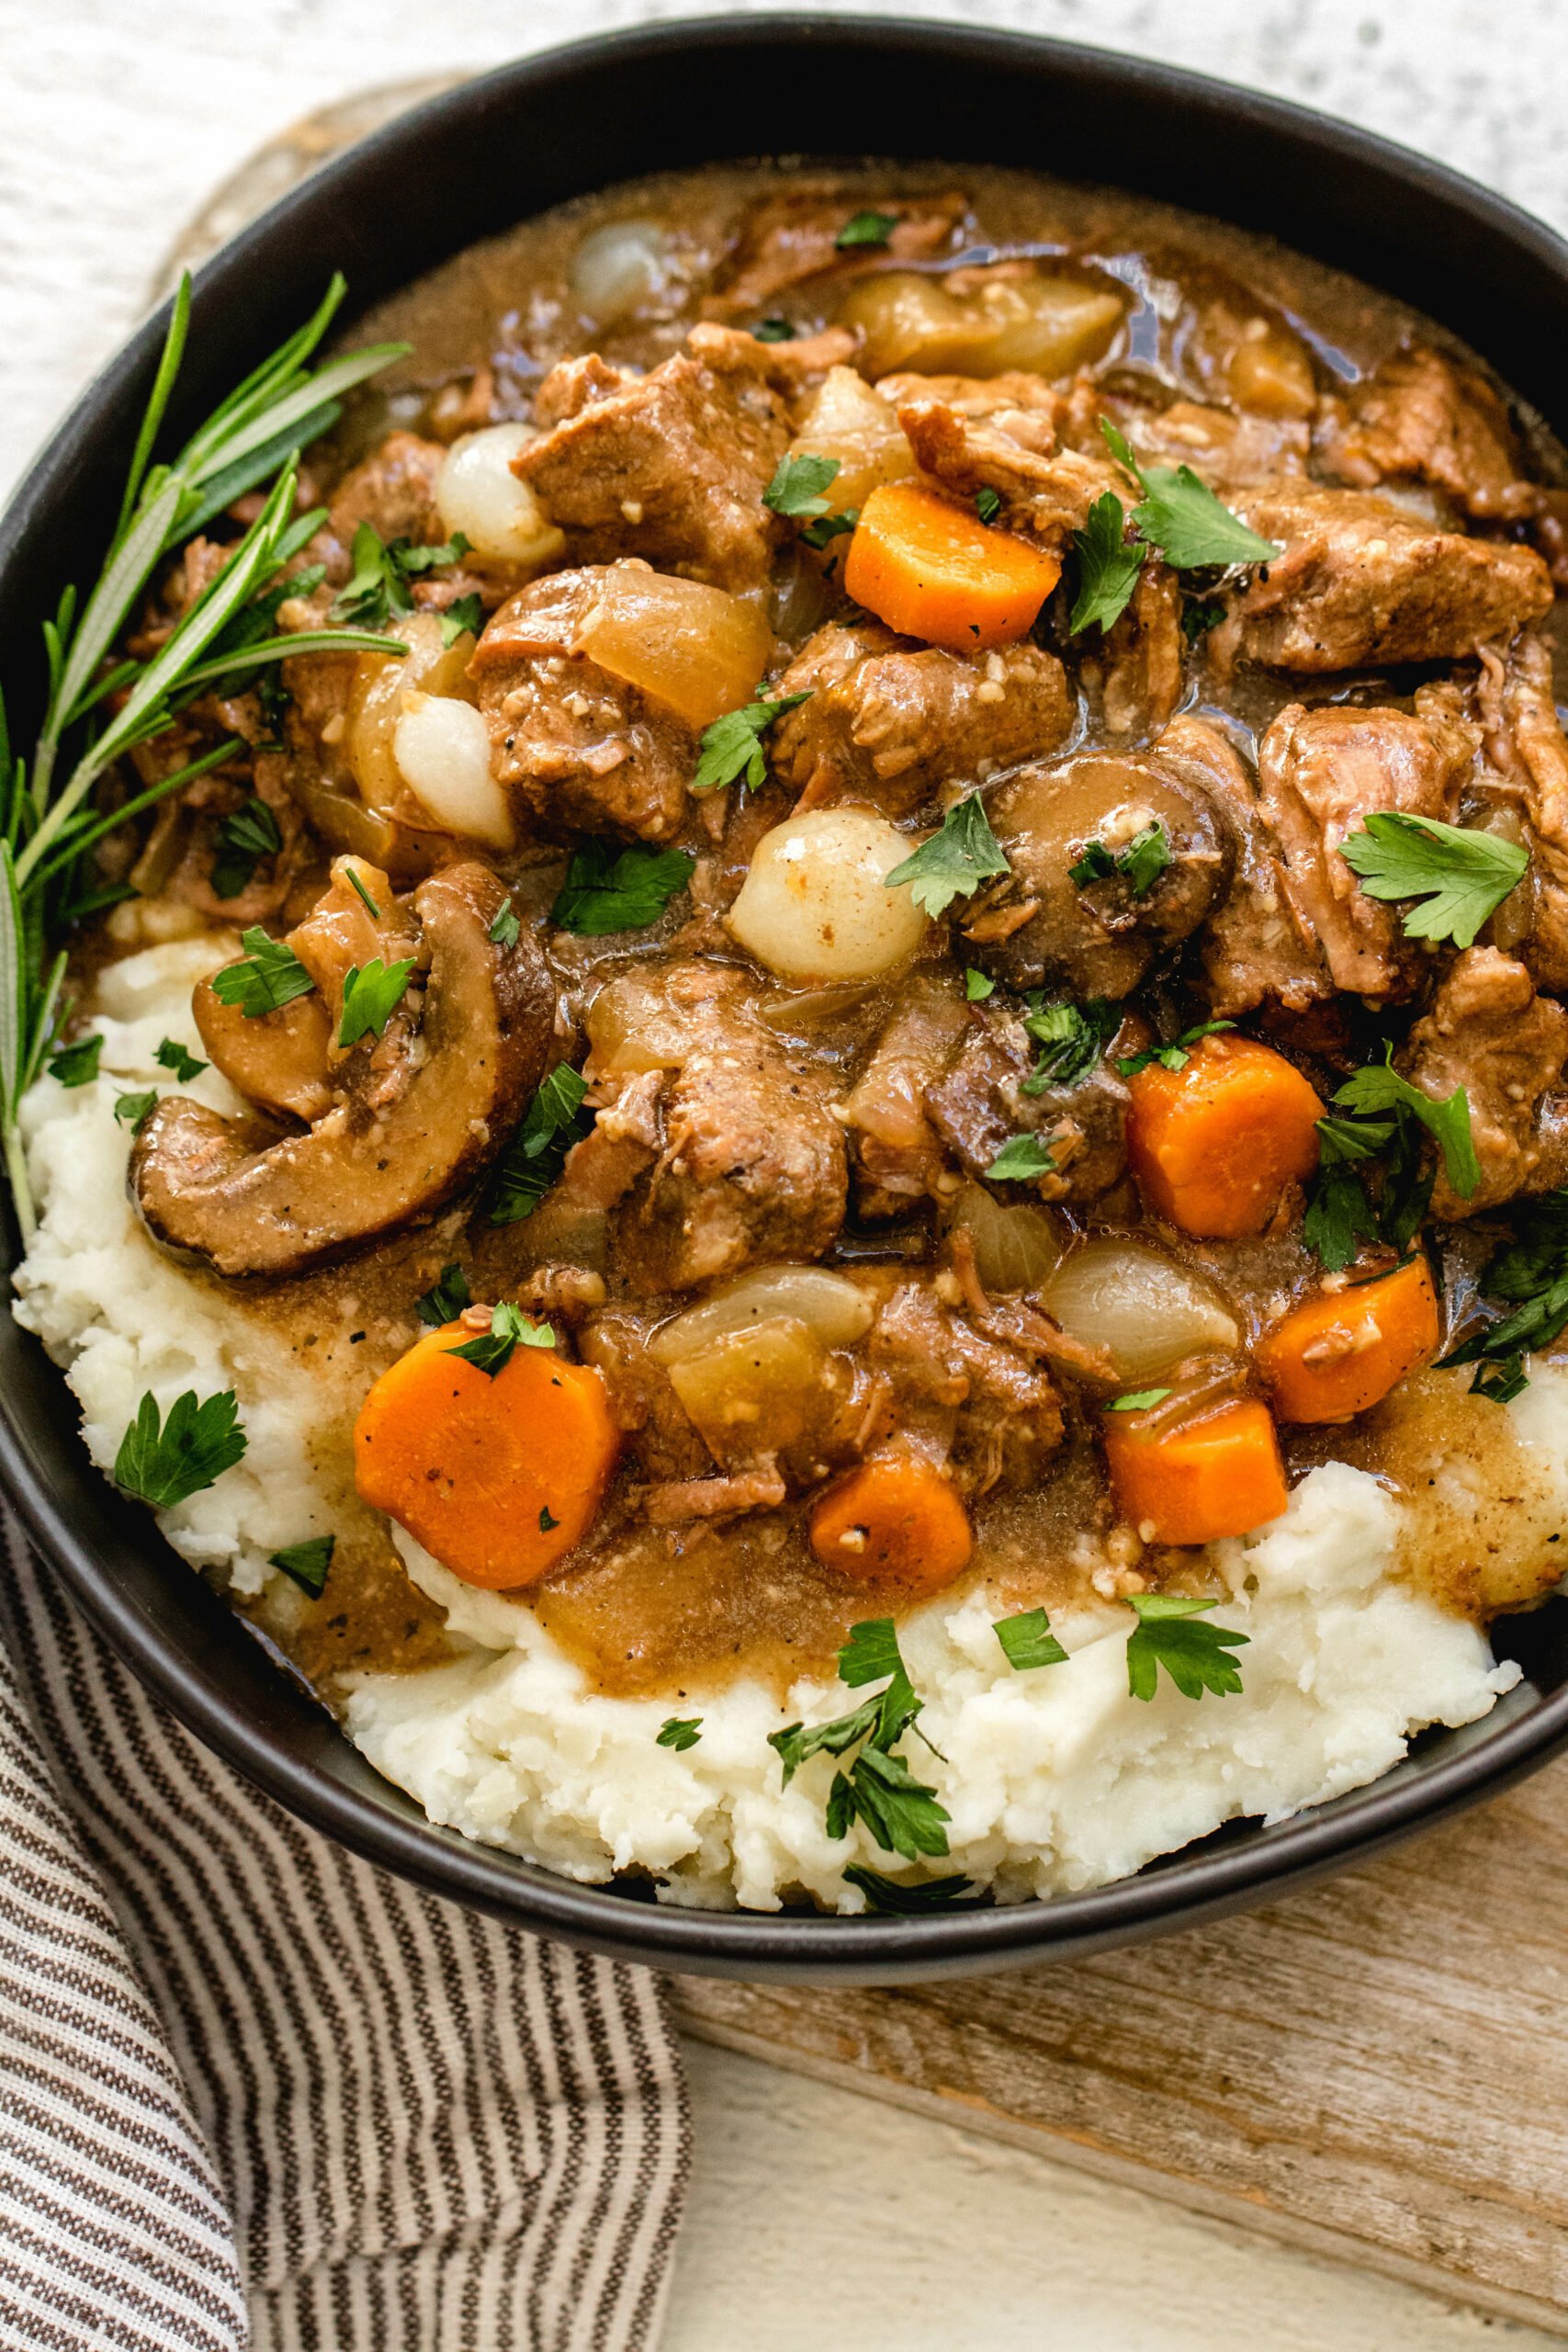 This Whole30 slow cooker beef bourguignon is an easy set it and forget recipe. It's paleo, gluten-free and dairy-free, full of vegetables and rich in flavor. Beef bourguignon in the crockpot is made with stew meat, and is ideal for a simple weeknight dinner or meal prep recipe to use for lunches. It's also freezer friendly, and this Whole30 beef recipe is sure to be a family favorite! #whole30slowcooker #whole30beef